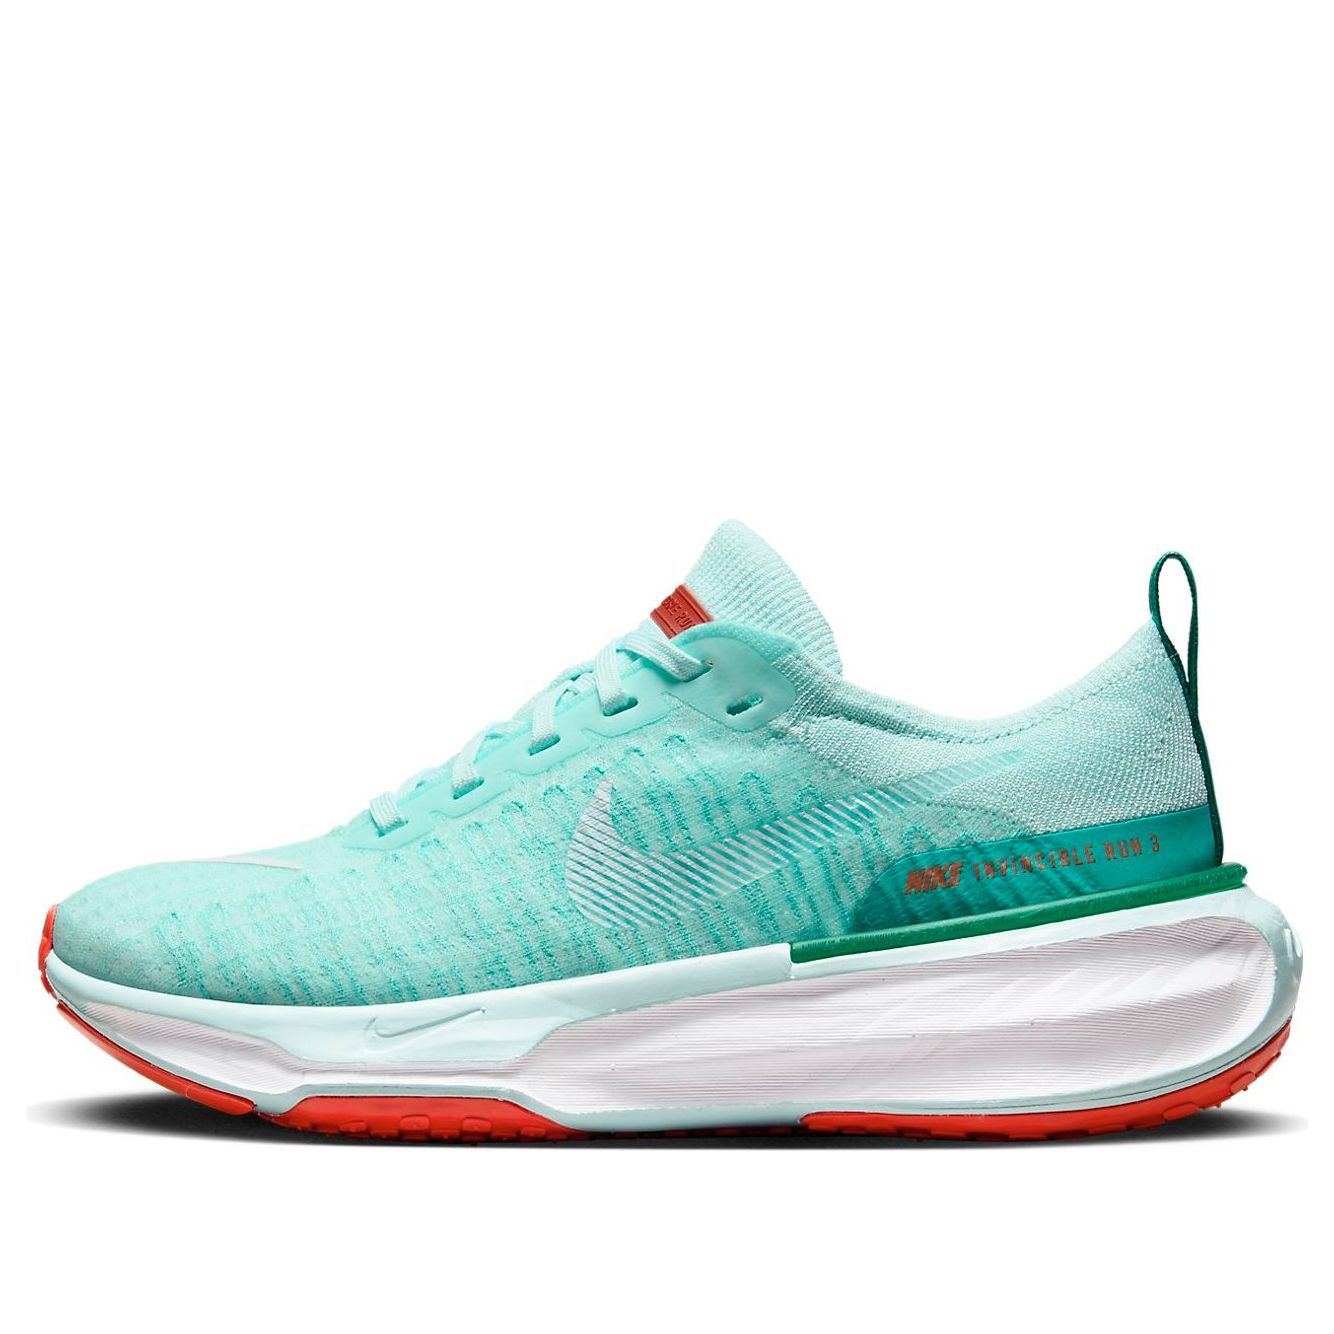 Nike ZoomX Invincible Run Flyknit 3 'Jade Ice' DR2660-300